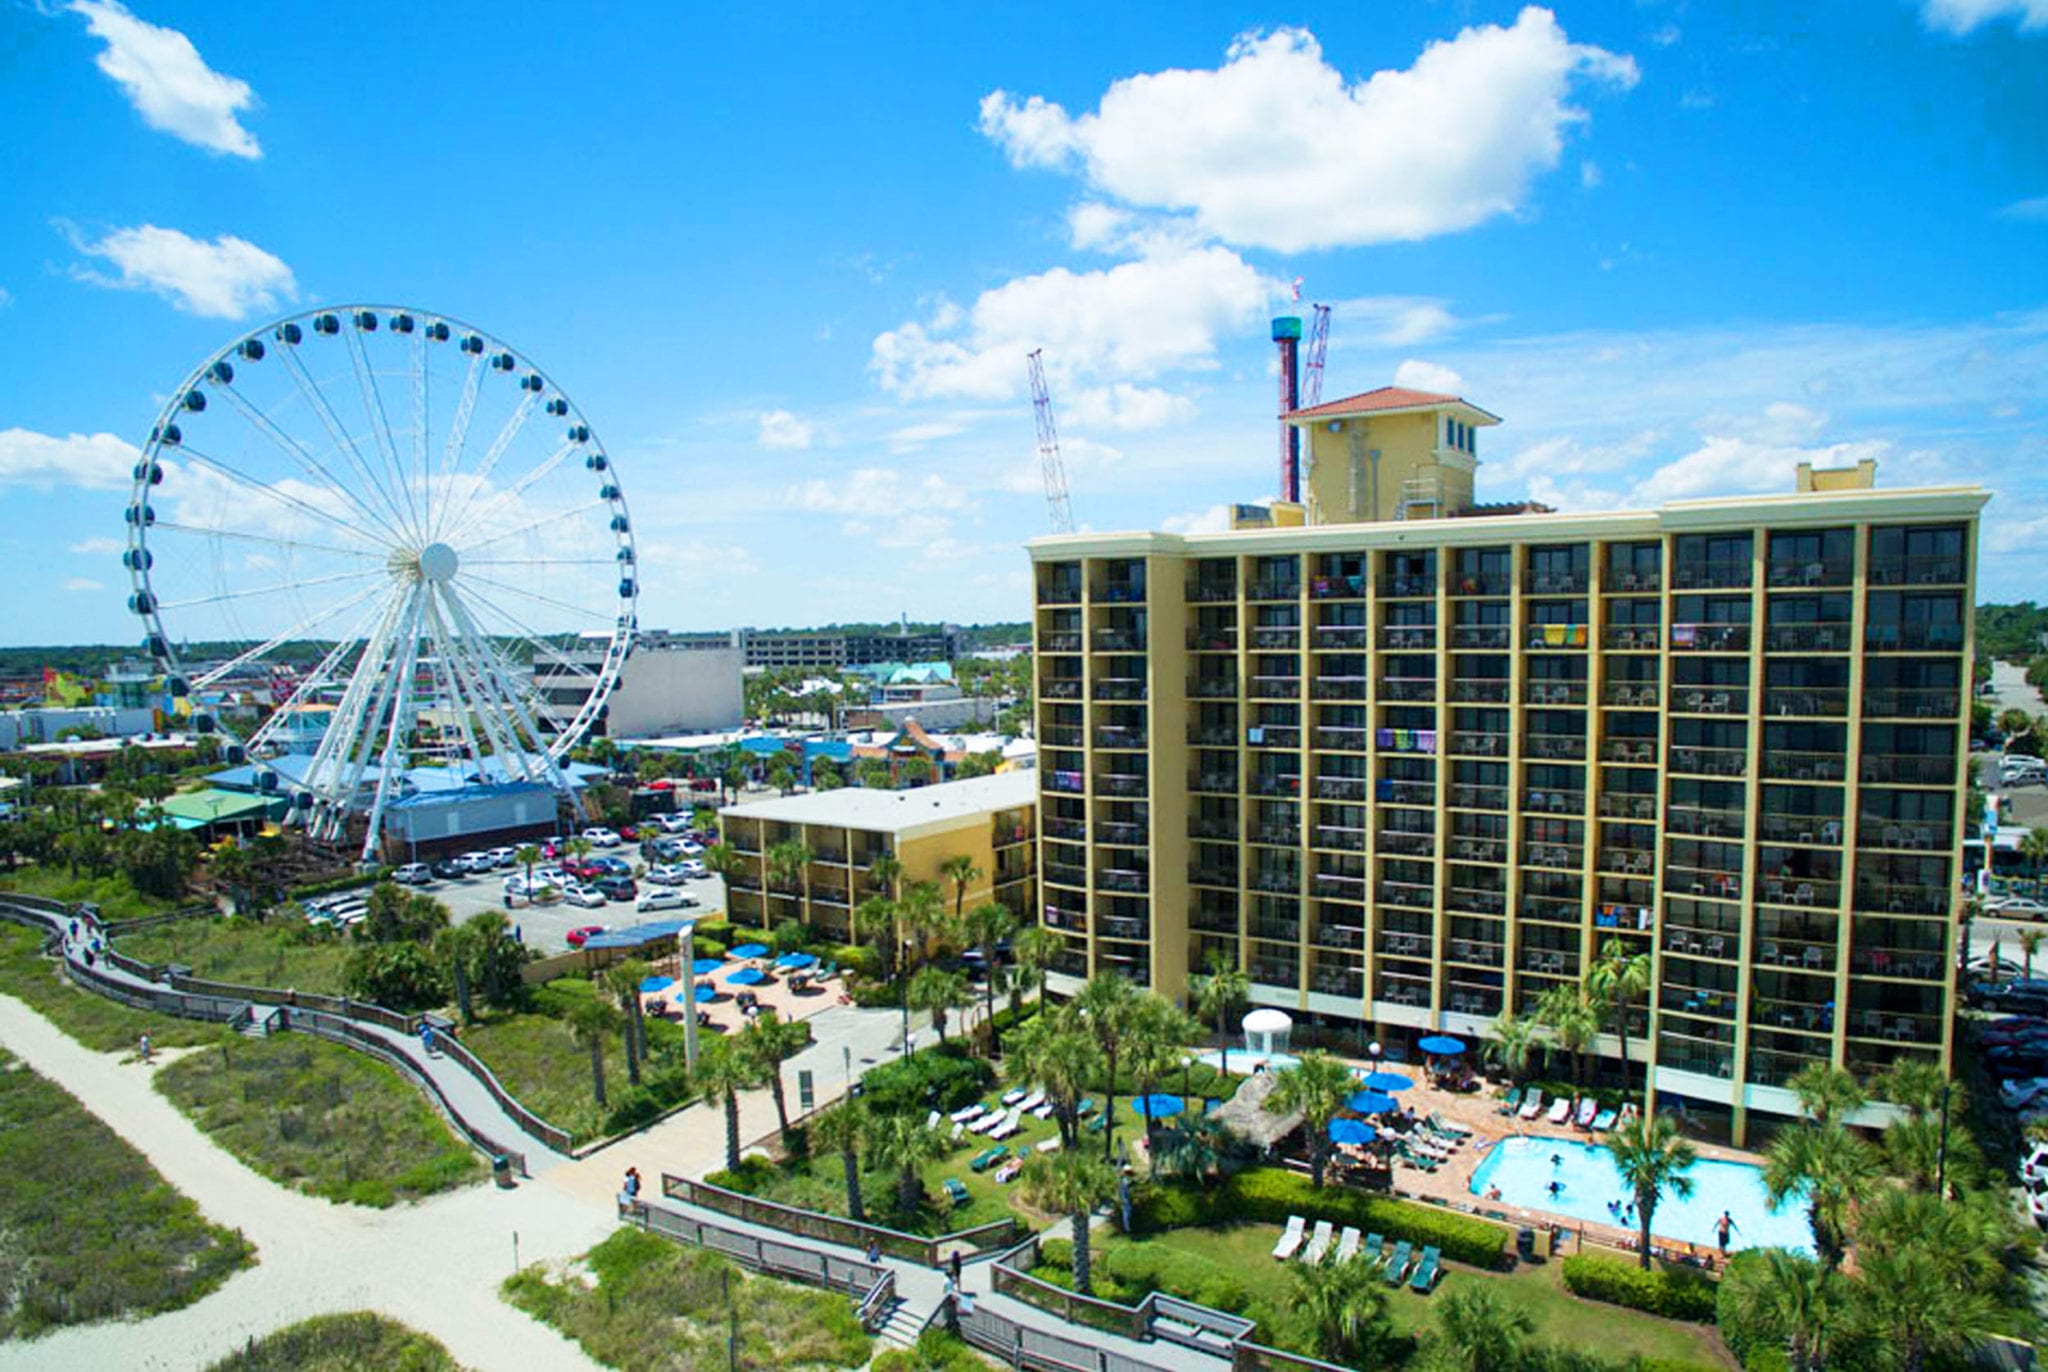 New hotels in myrtle beach